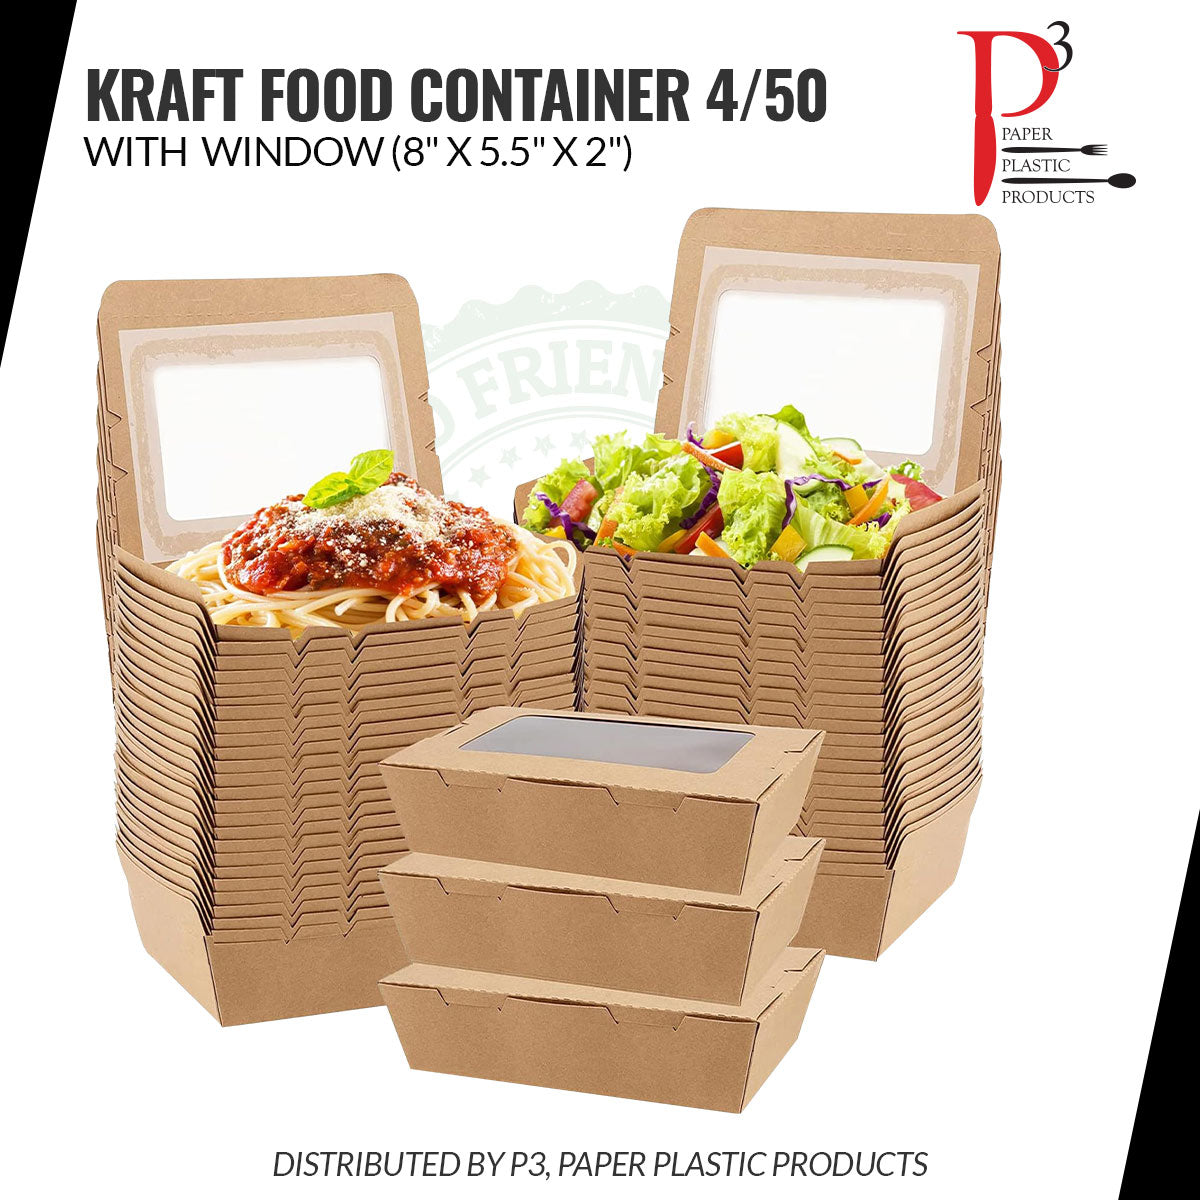 Kraft Food Container with window 8" x 5.5" x 2" 4/50